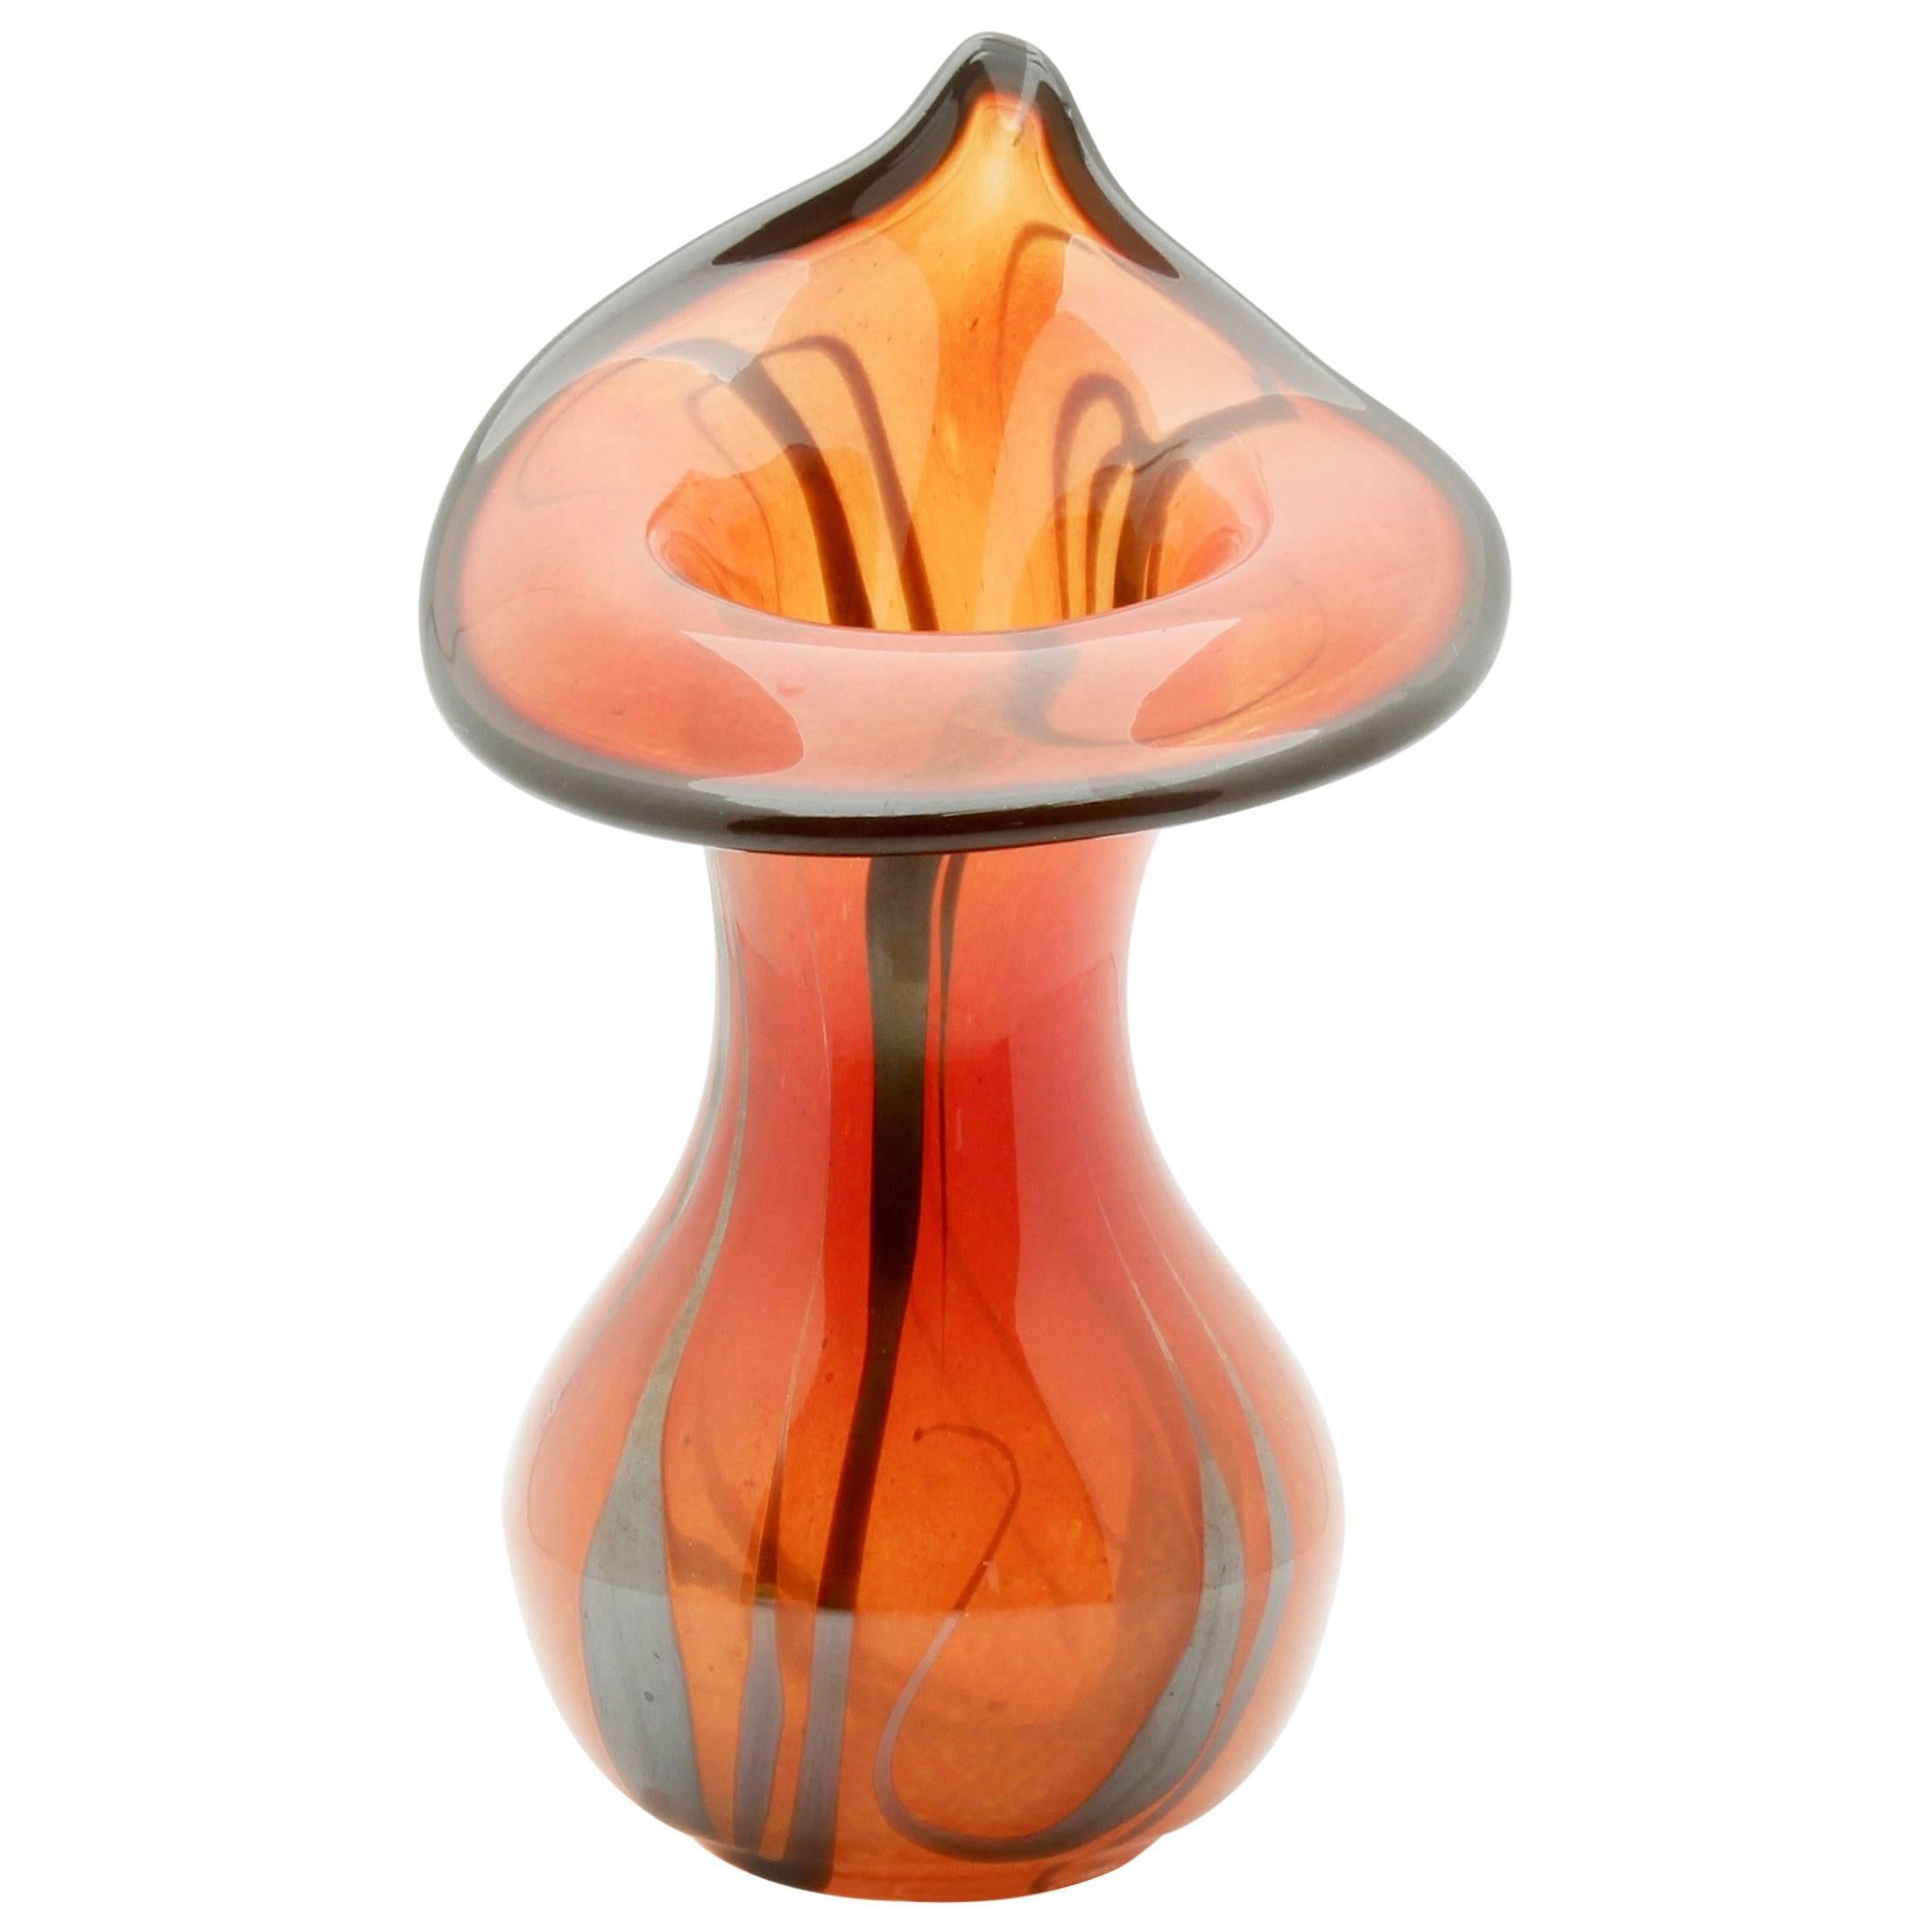 Fabulous Murano Art Glass "Jack-in-the-Pulpit" Vase